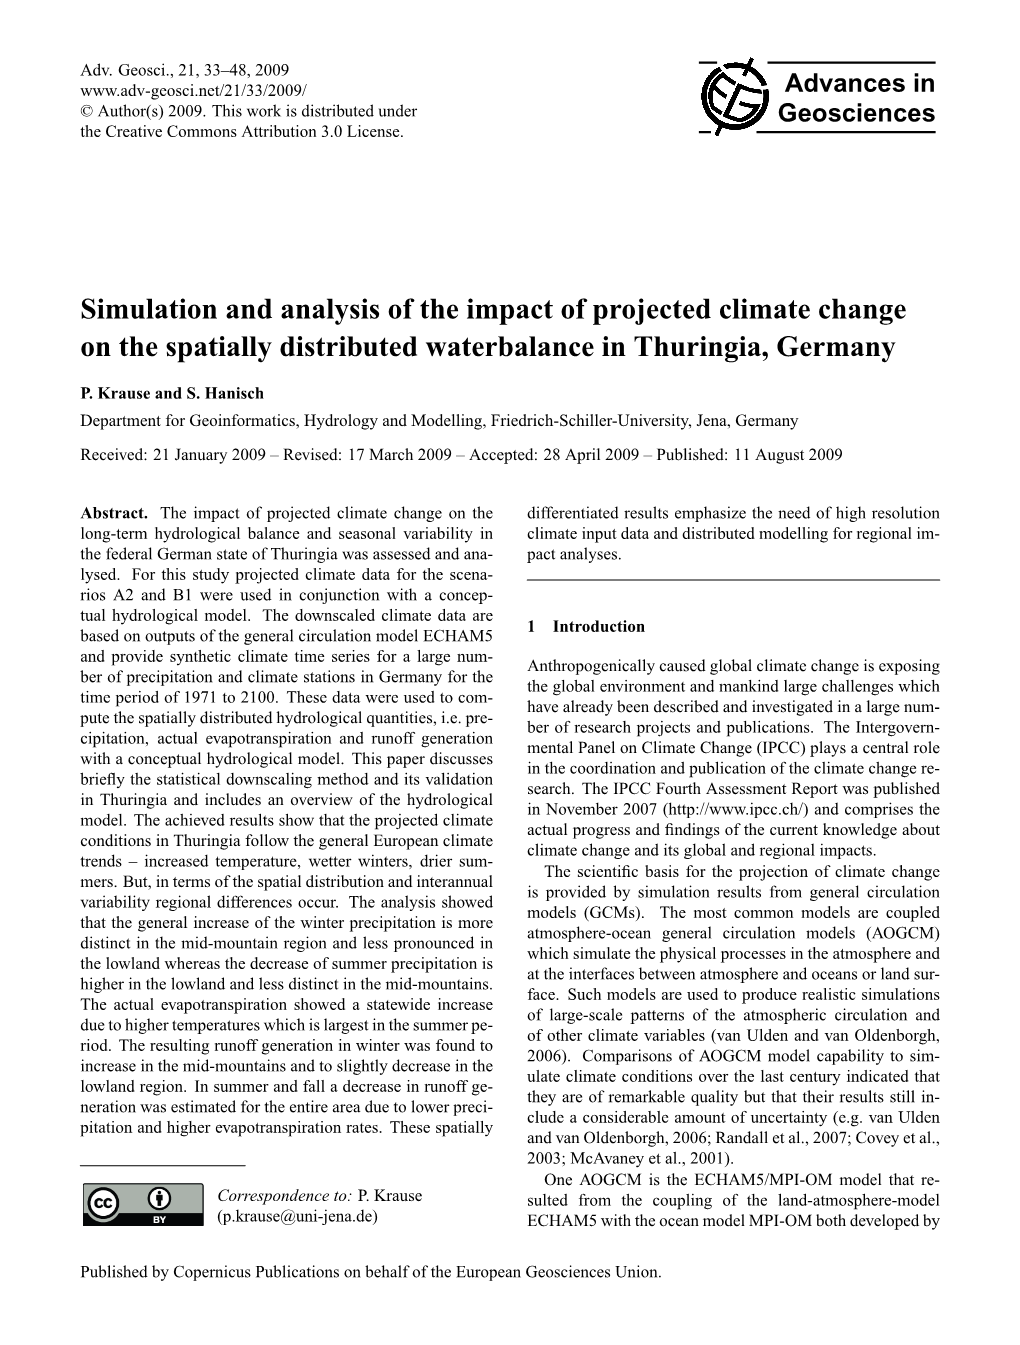 Simulation and Analysis of the Impact of Projected Climate Change on the Spatially Distributed Waterbalance in Thuringia, Germany